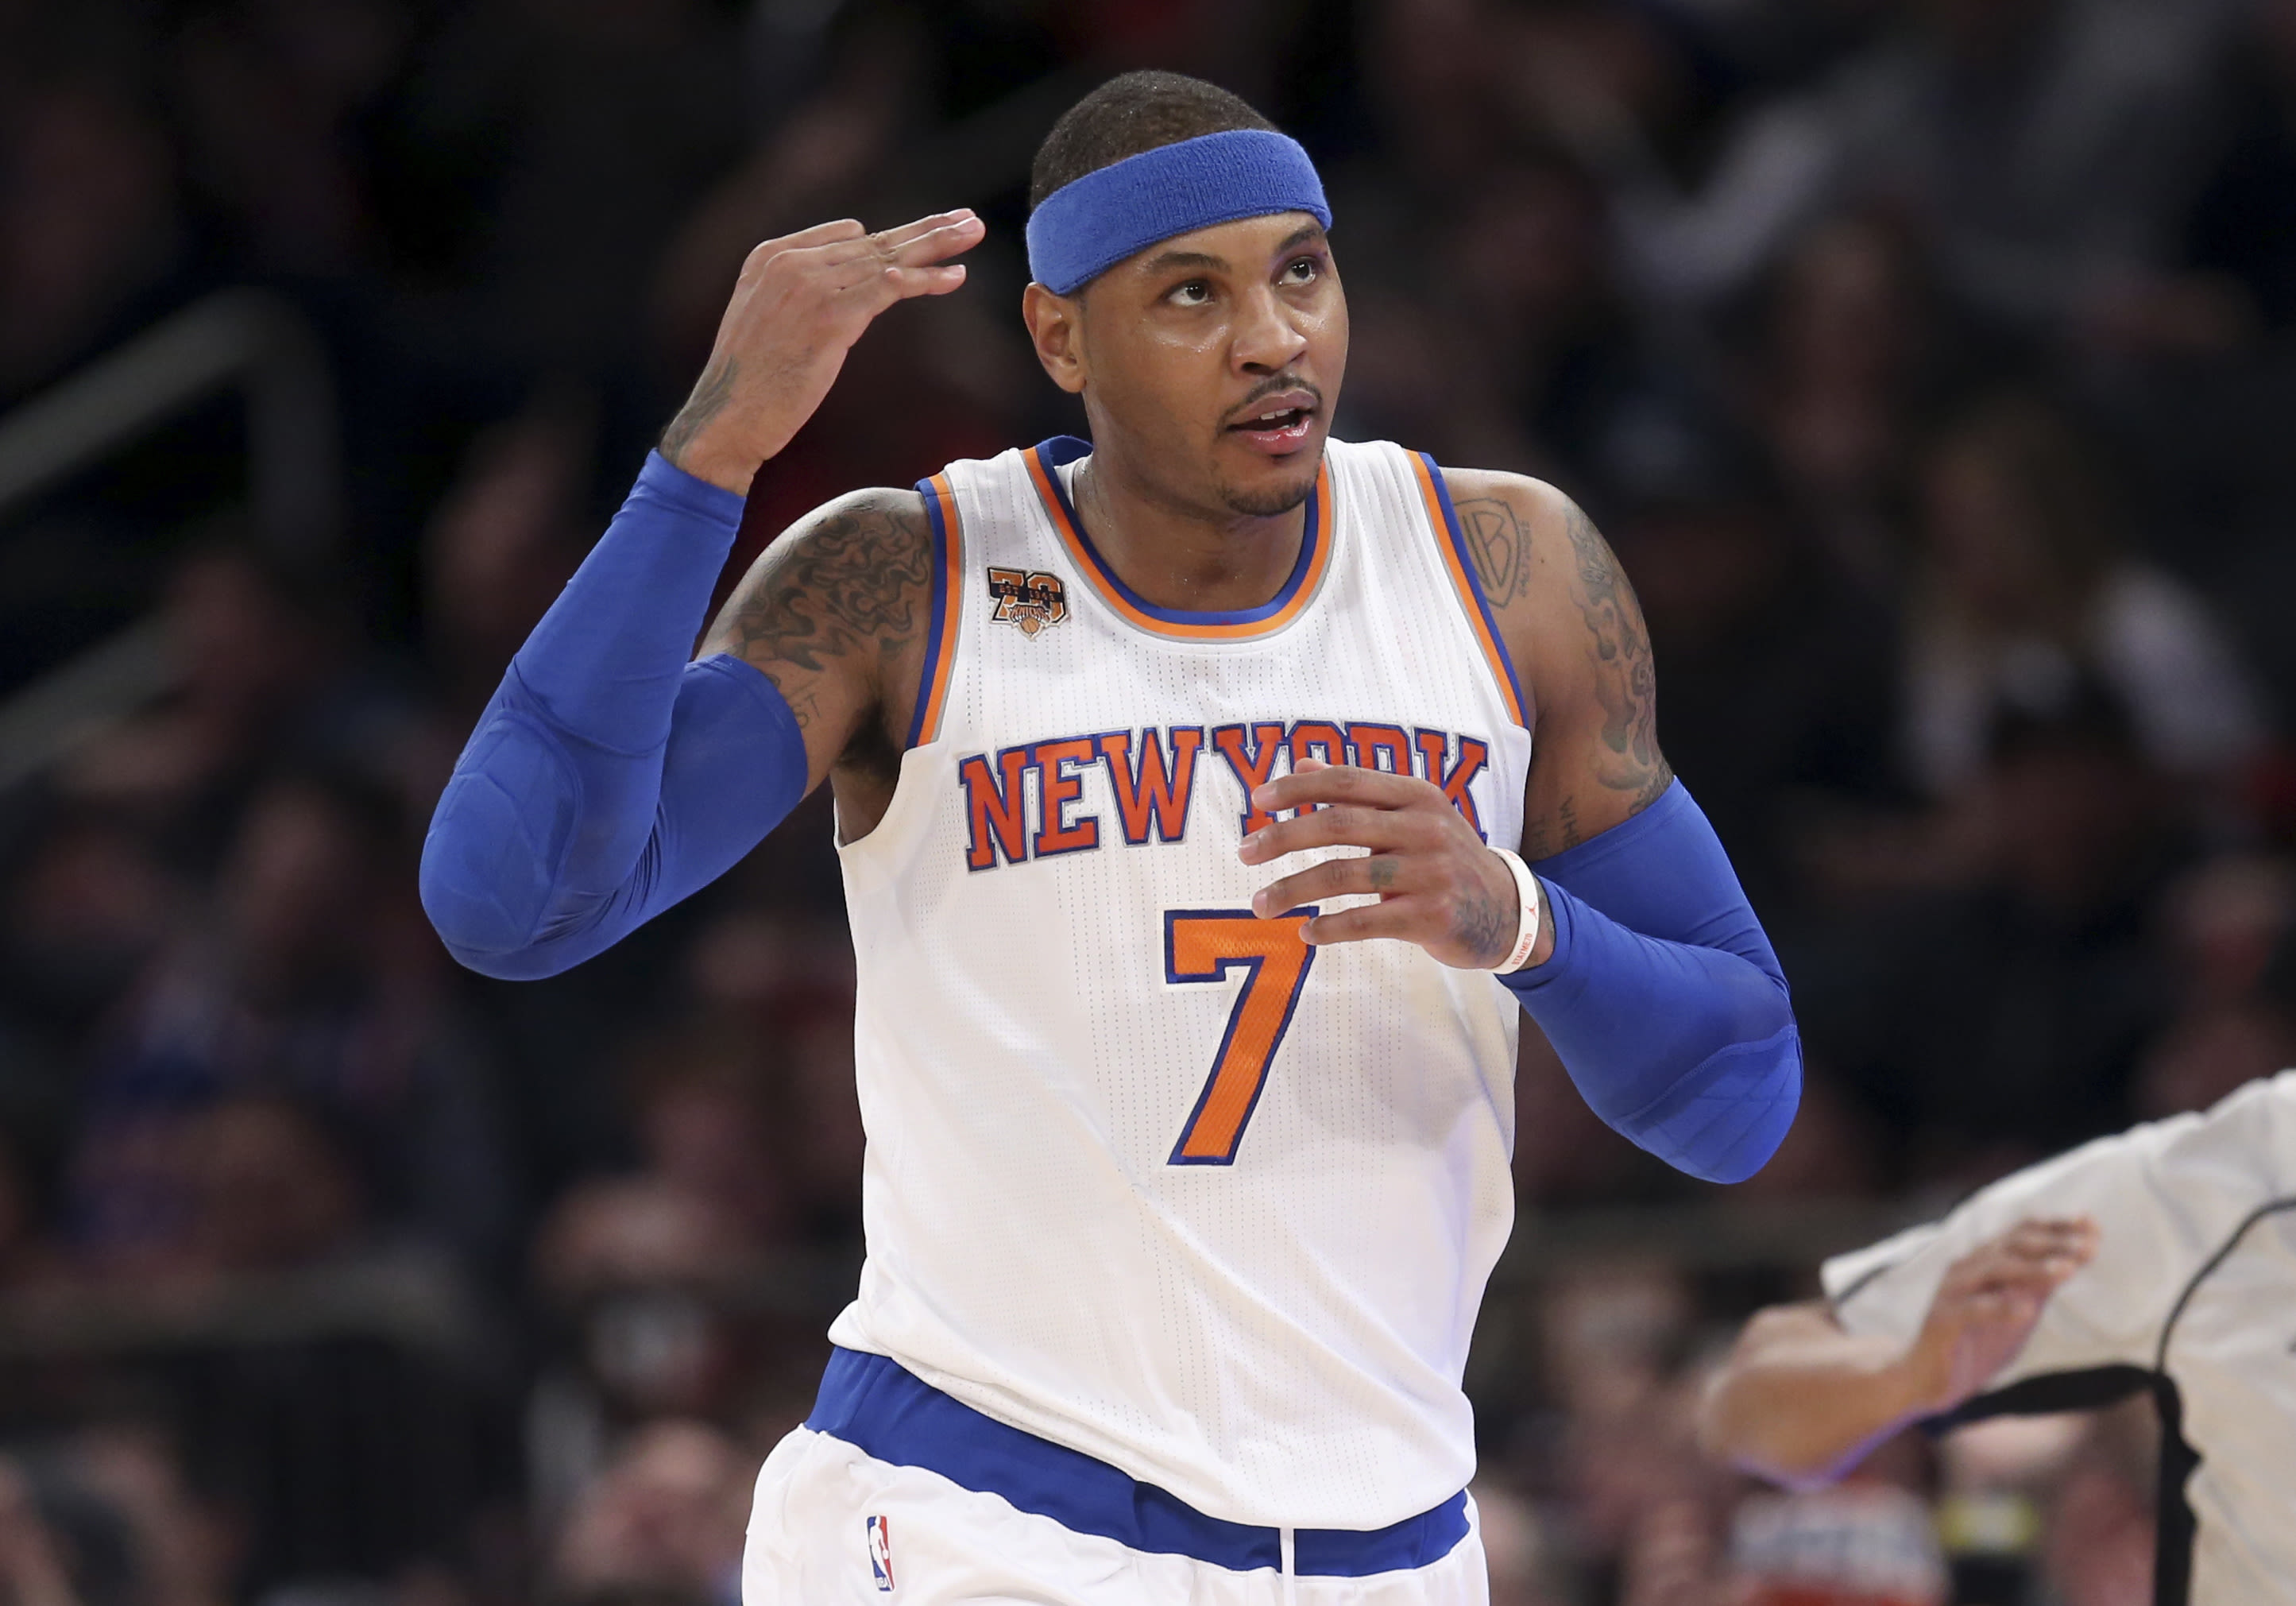 NBA great Carmelo Anthony retires after 19 seasons